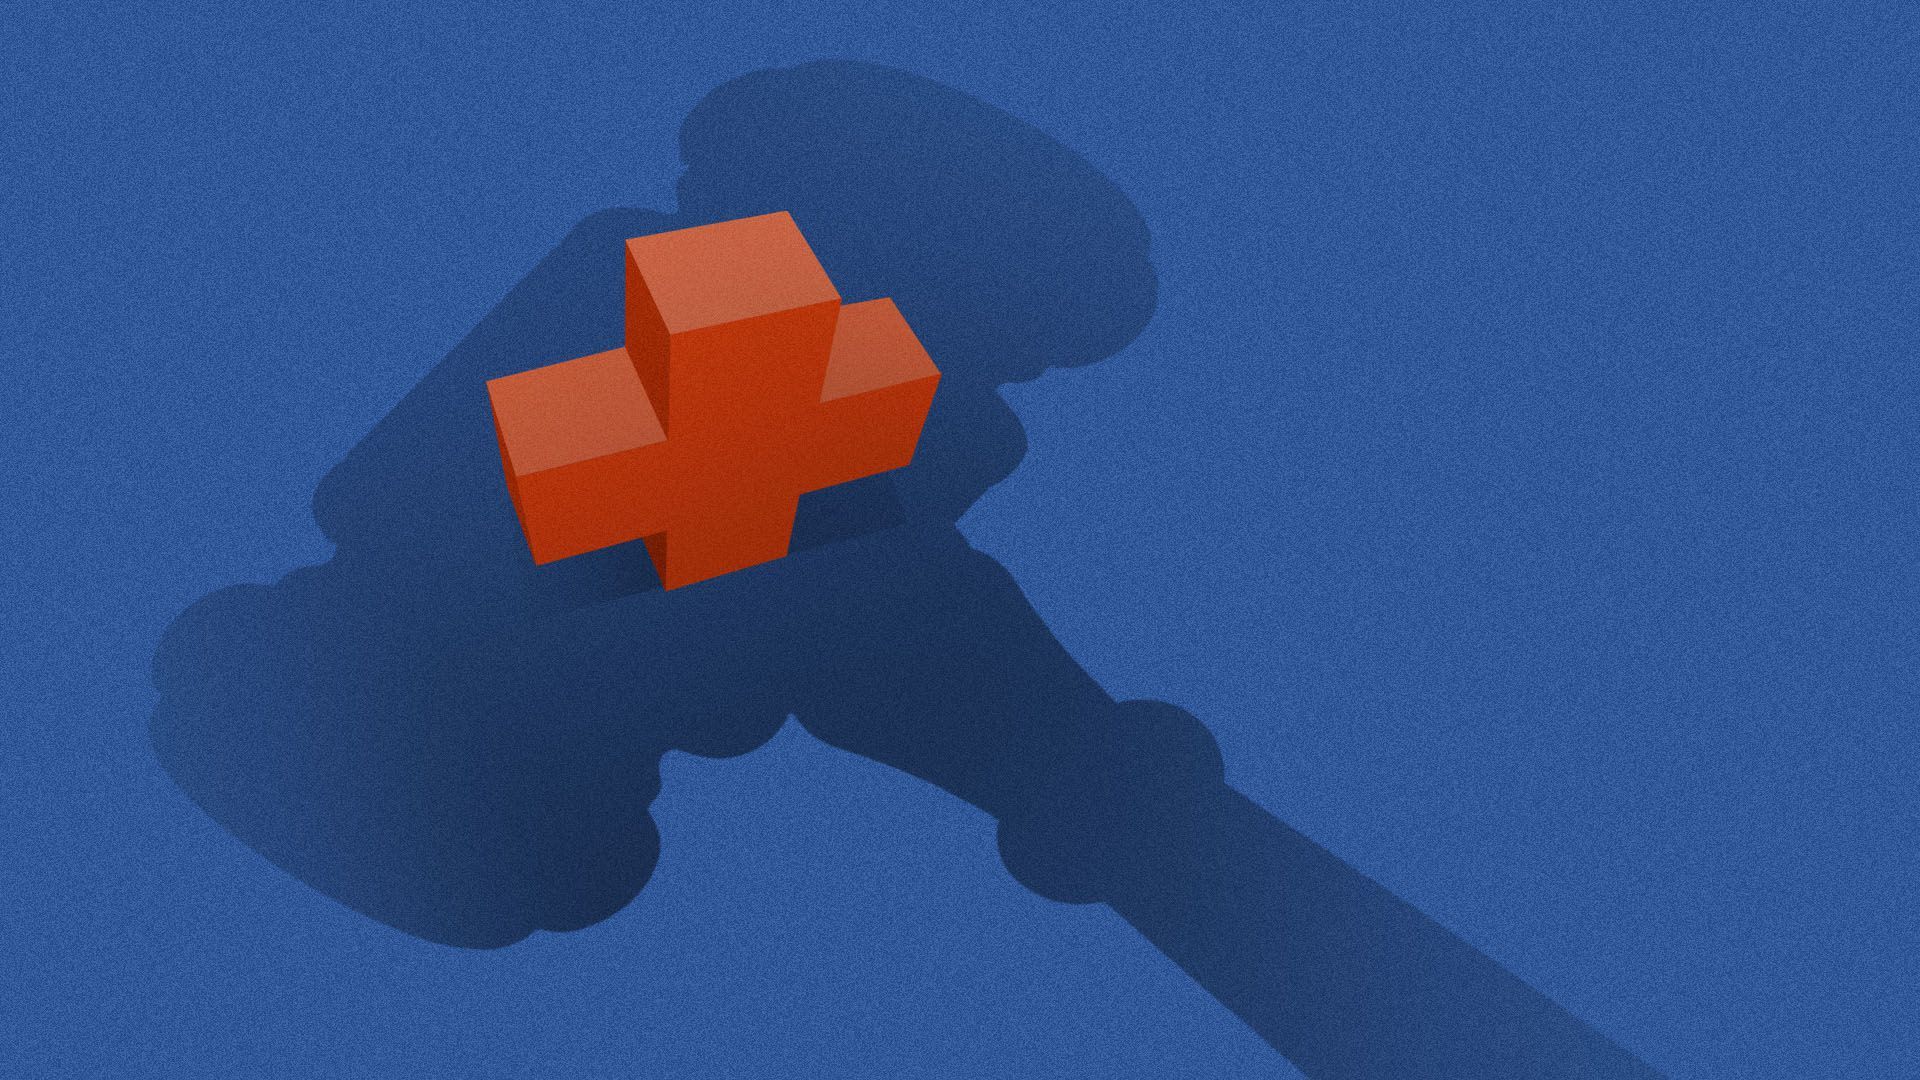 Illustration of a gavel's shadow over a medical symbol